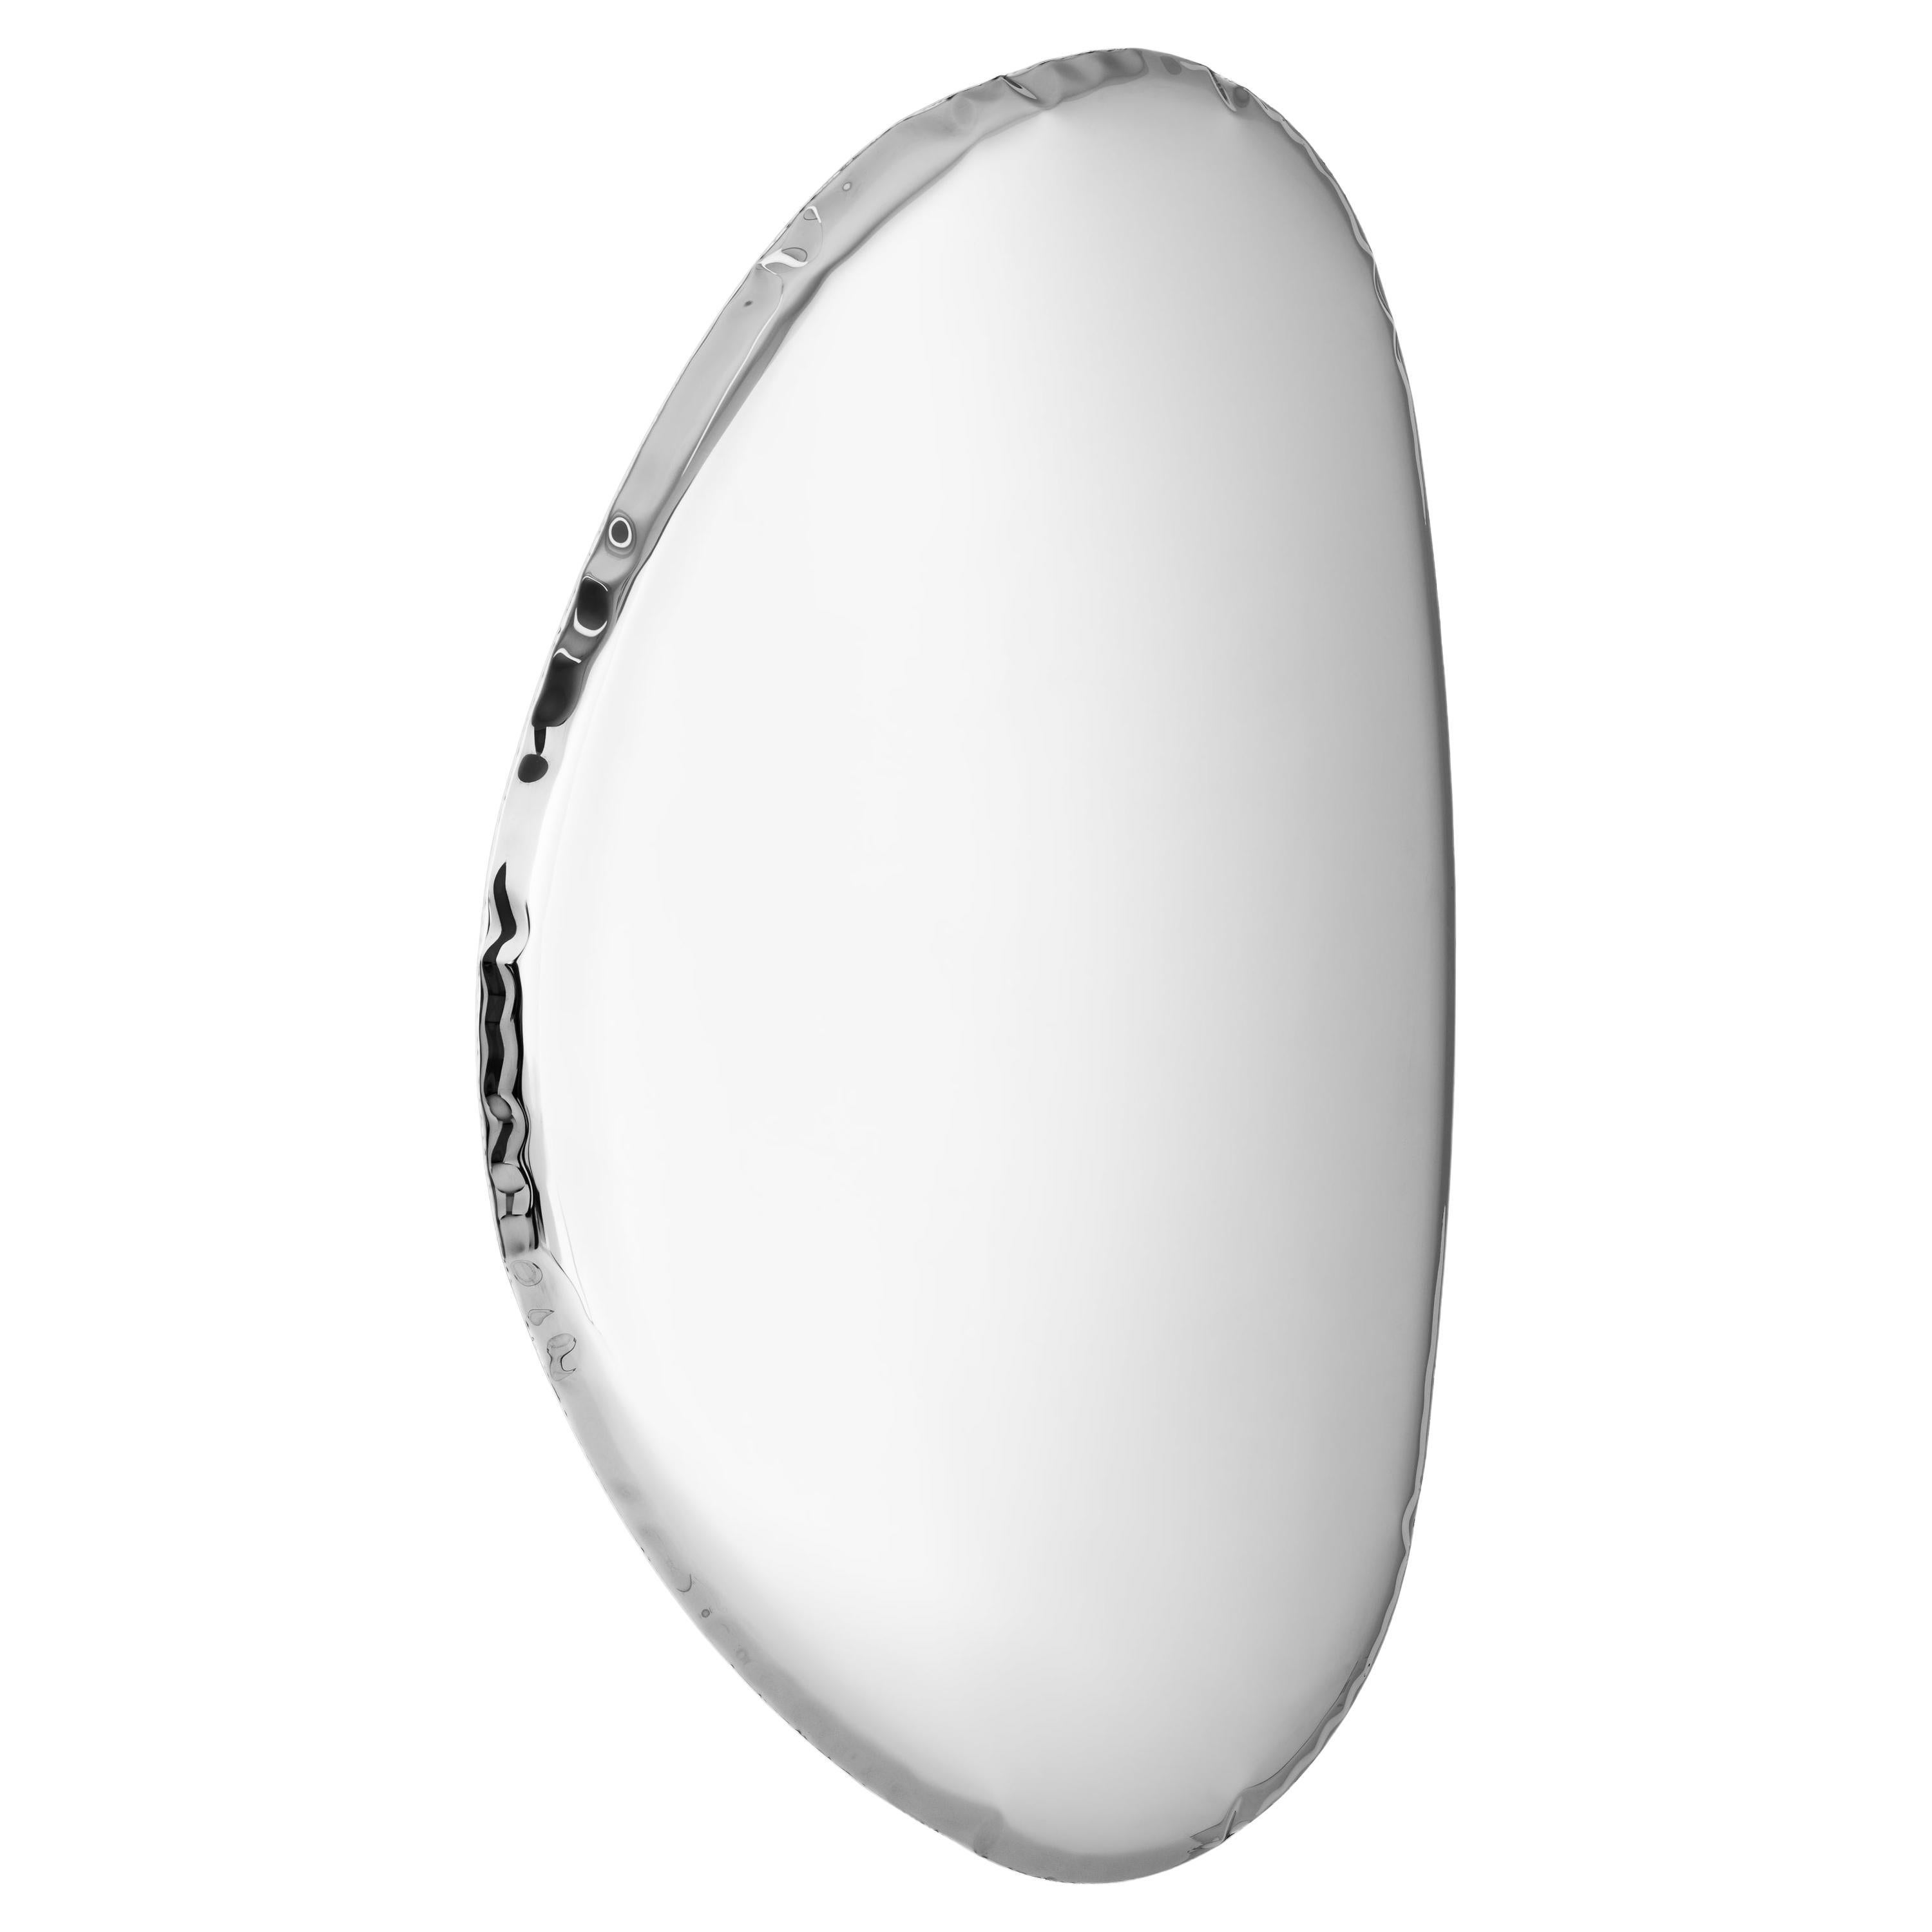 In Stock Tafla O2 Polished Stainless Steel Wall Mirror by Zieta For Sale